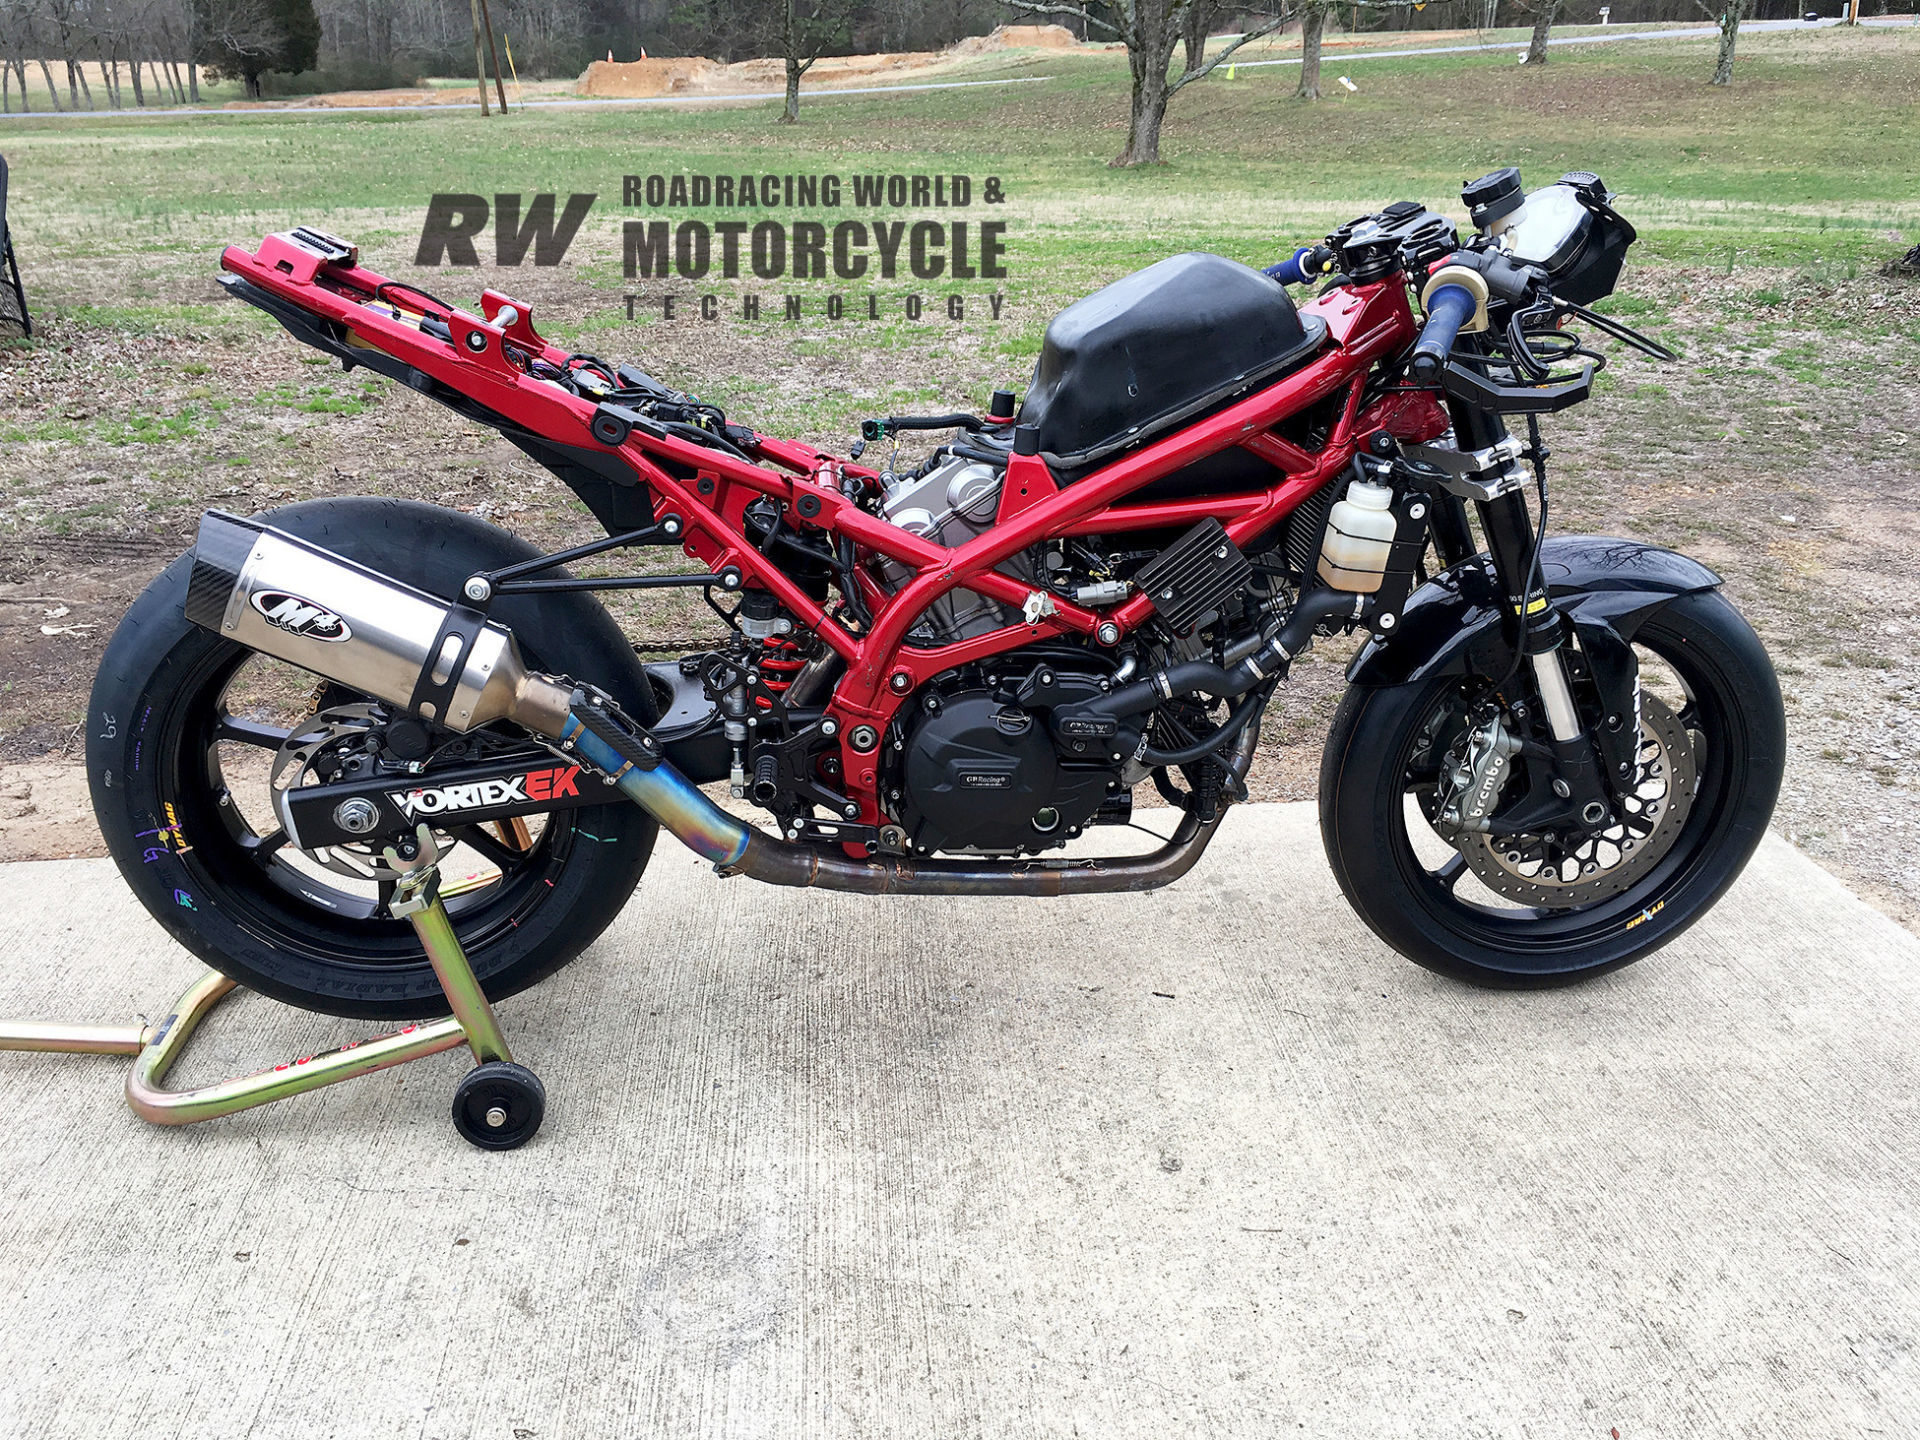 Alex Dumas’ 2019 Twins Cup-winning SV650 without bodywork, with the JHS Racing oversize, carbon-fiber airbox in place.